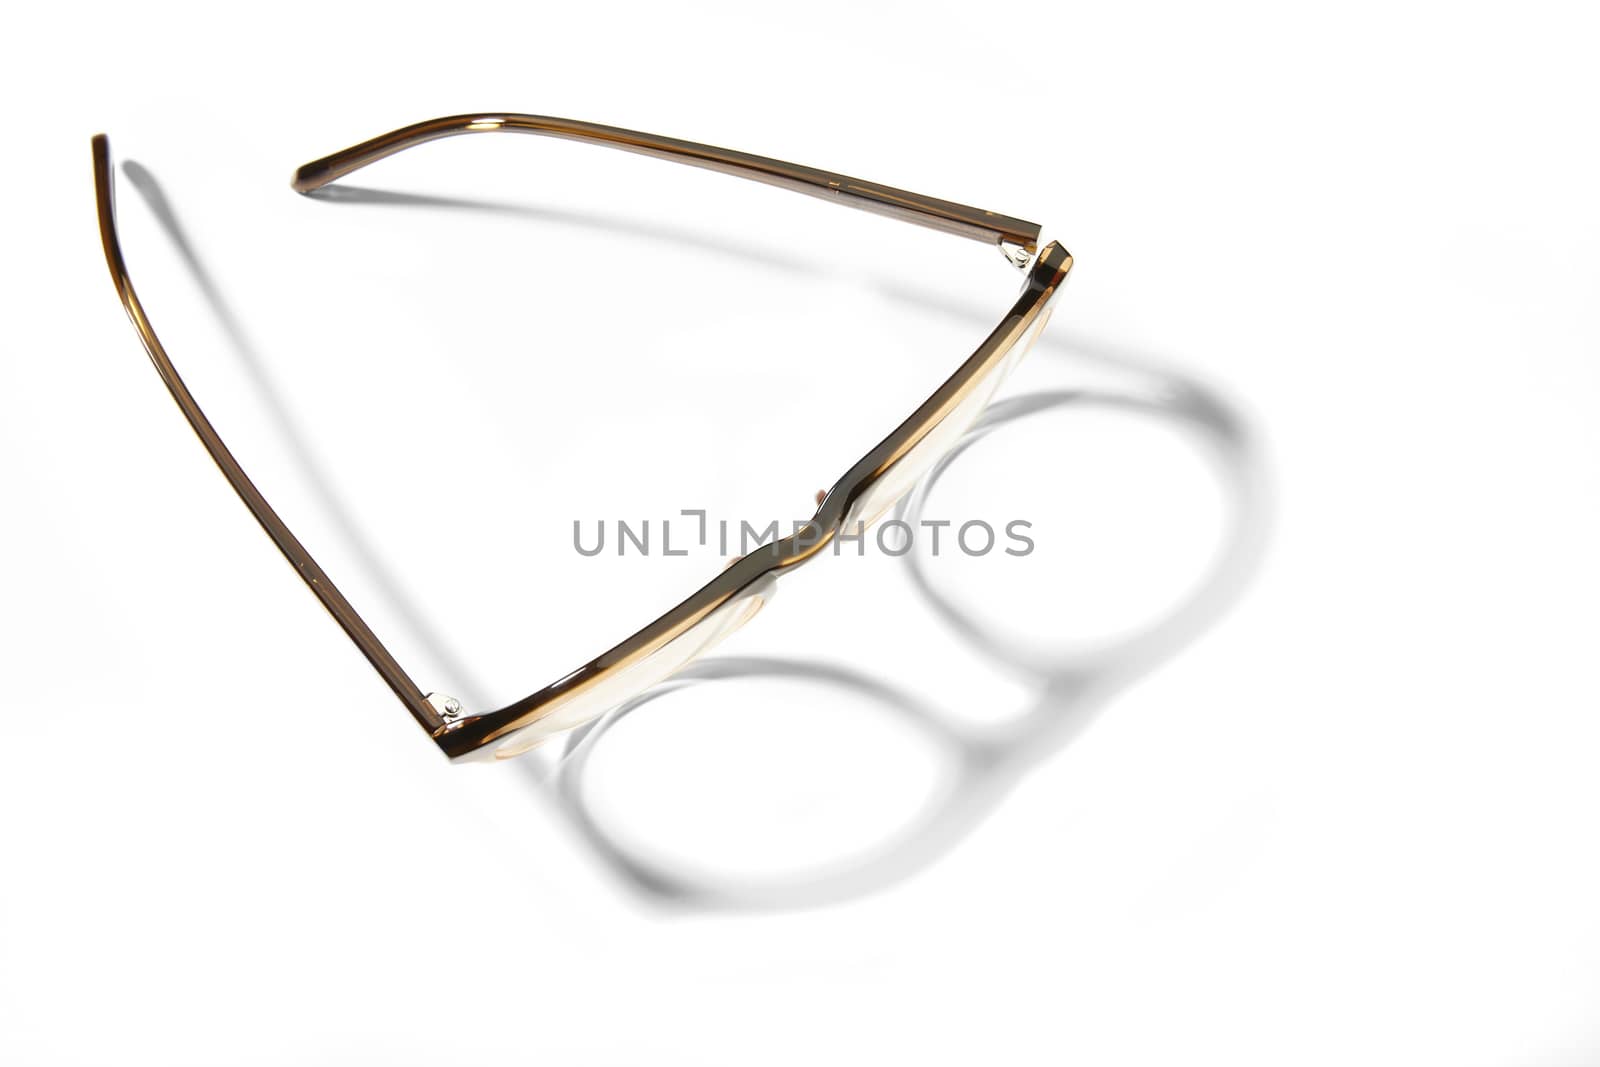 Studio shot of pair of eyeglasses on white background with shadow.